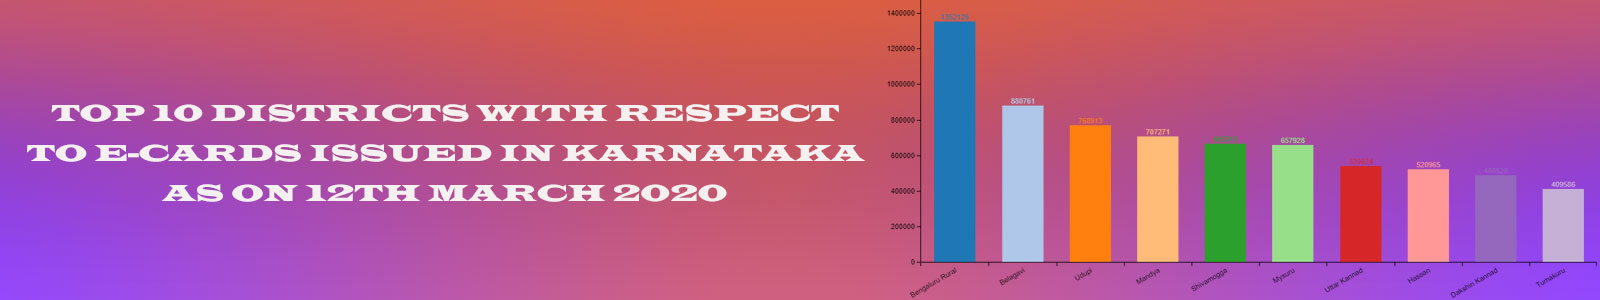 Top 10 Districts with respect to E-cards Issued in Karnataka As on 12th March 2020